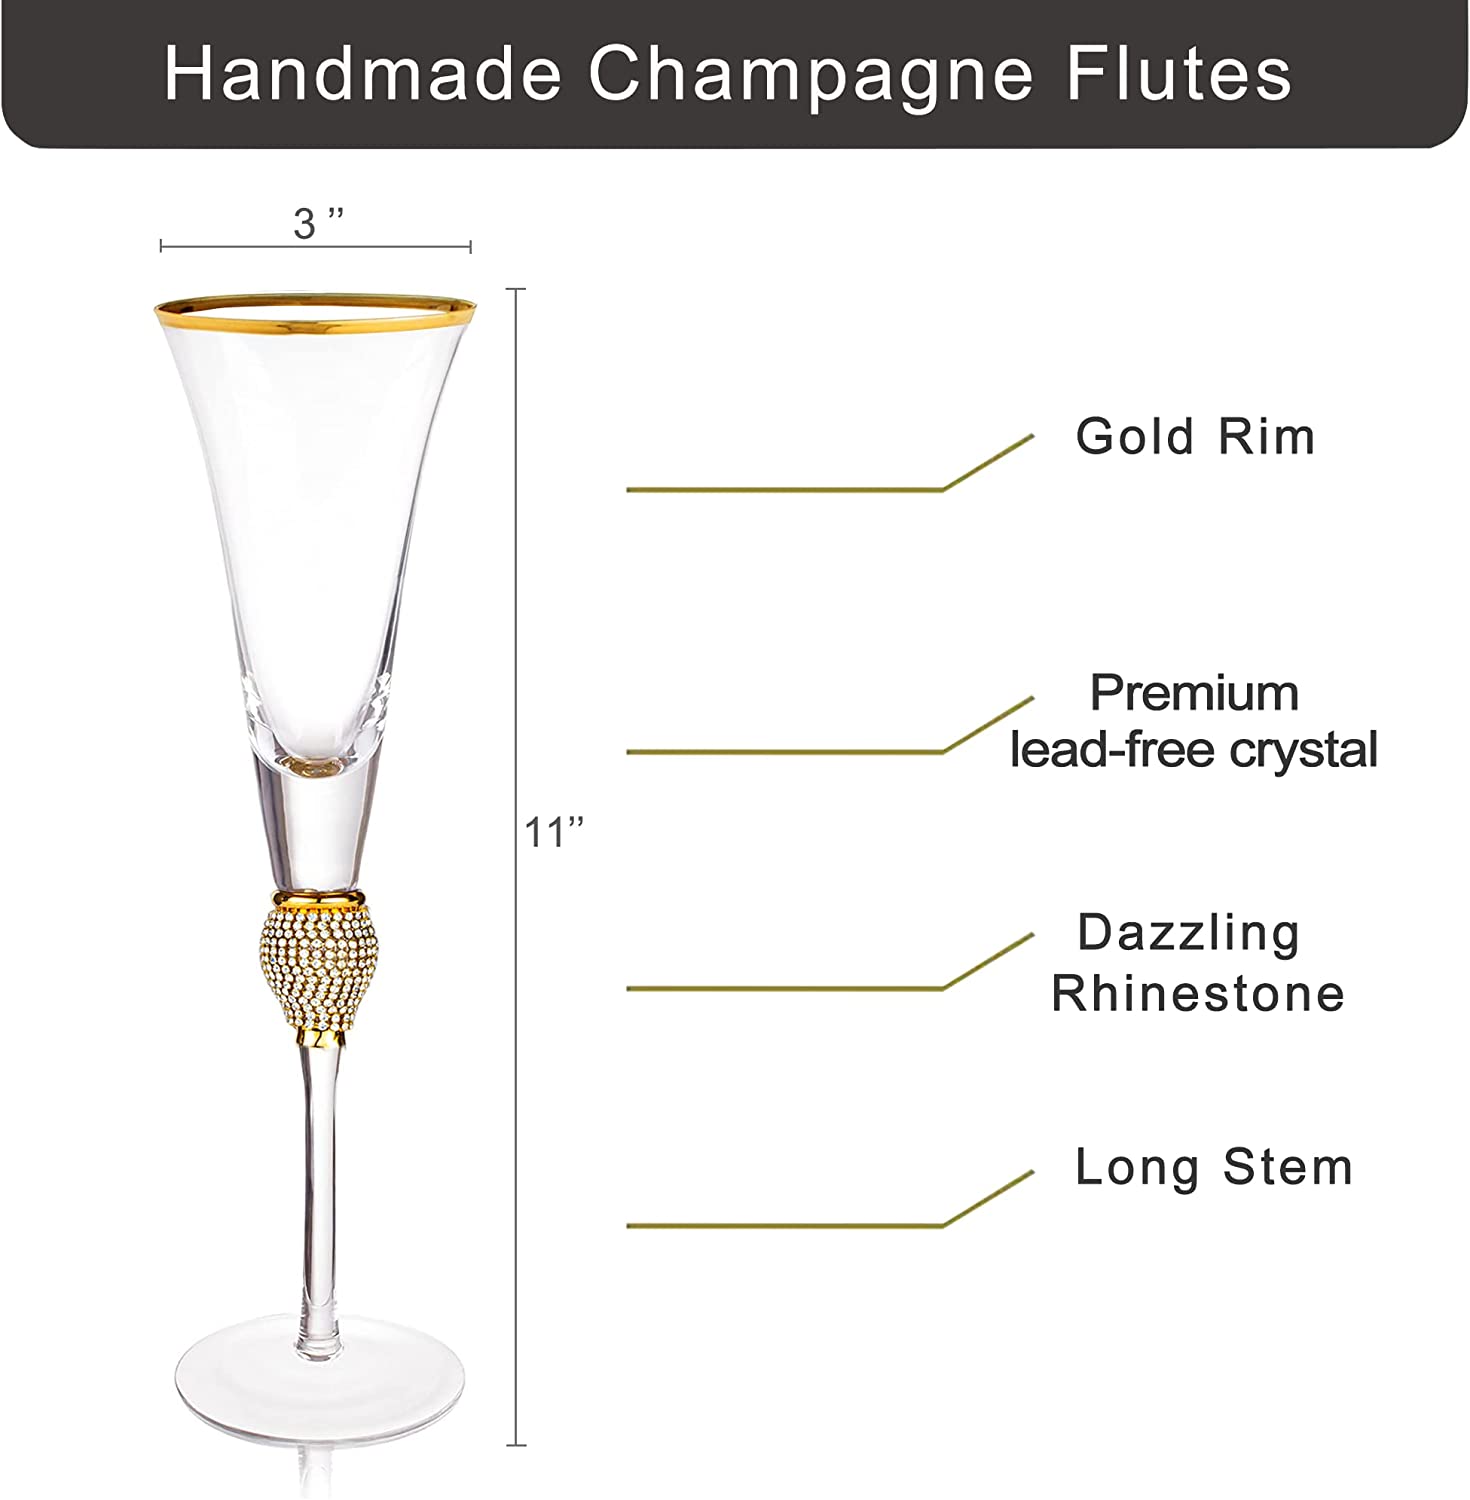 Champagne Flutes, Wedding Cake Knife and Server Set, Toasting Champagne Glasses with Gold Rim Rhinestone Studded Engraved Mr and Mrs, Couple Bride and Groom Wedding & Engagement gift - VARLKA